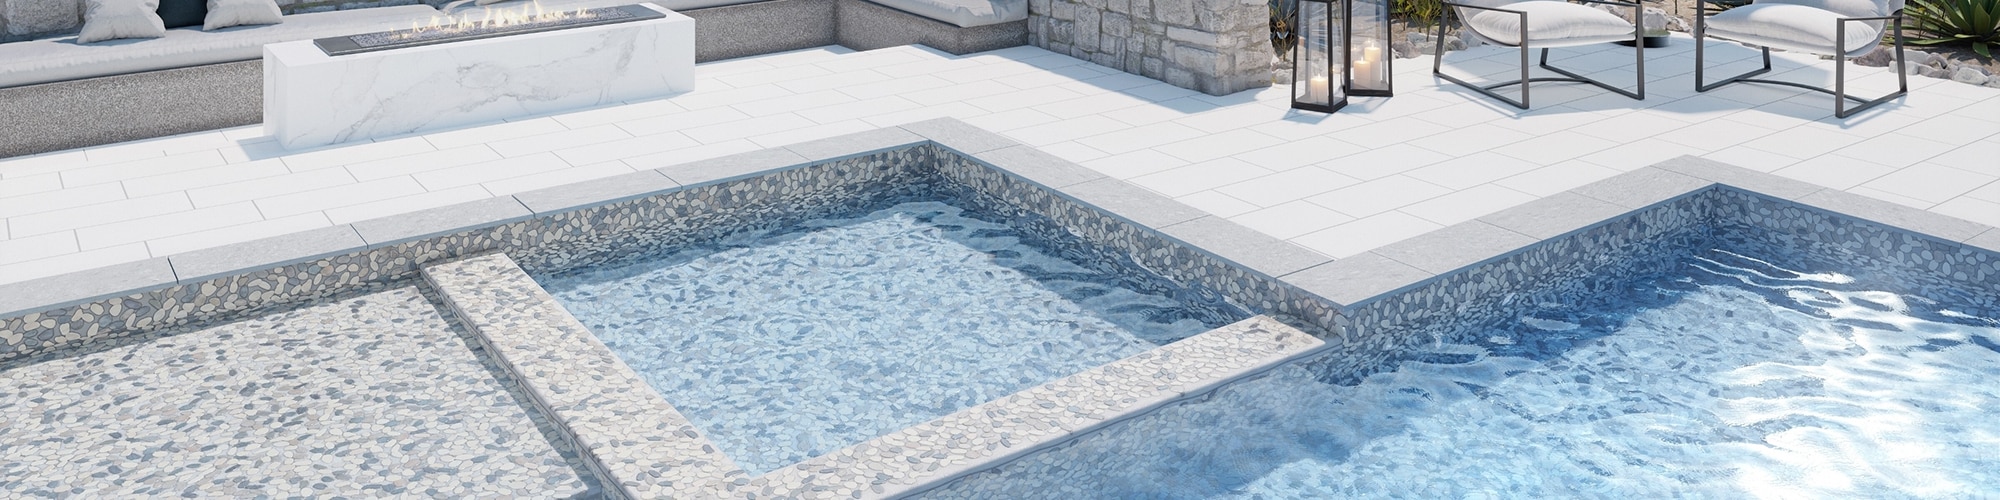 Pool and hot tub with white and gray pebble mosaic pool tile and gray tile border, pool deck with white tile, firepit with marble-look porcelain slab, and outdoor couches.